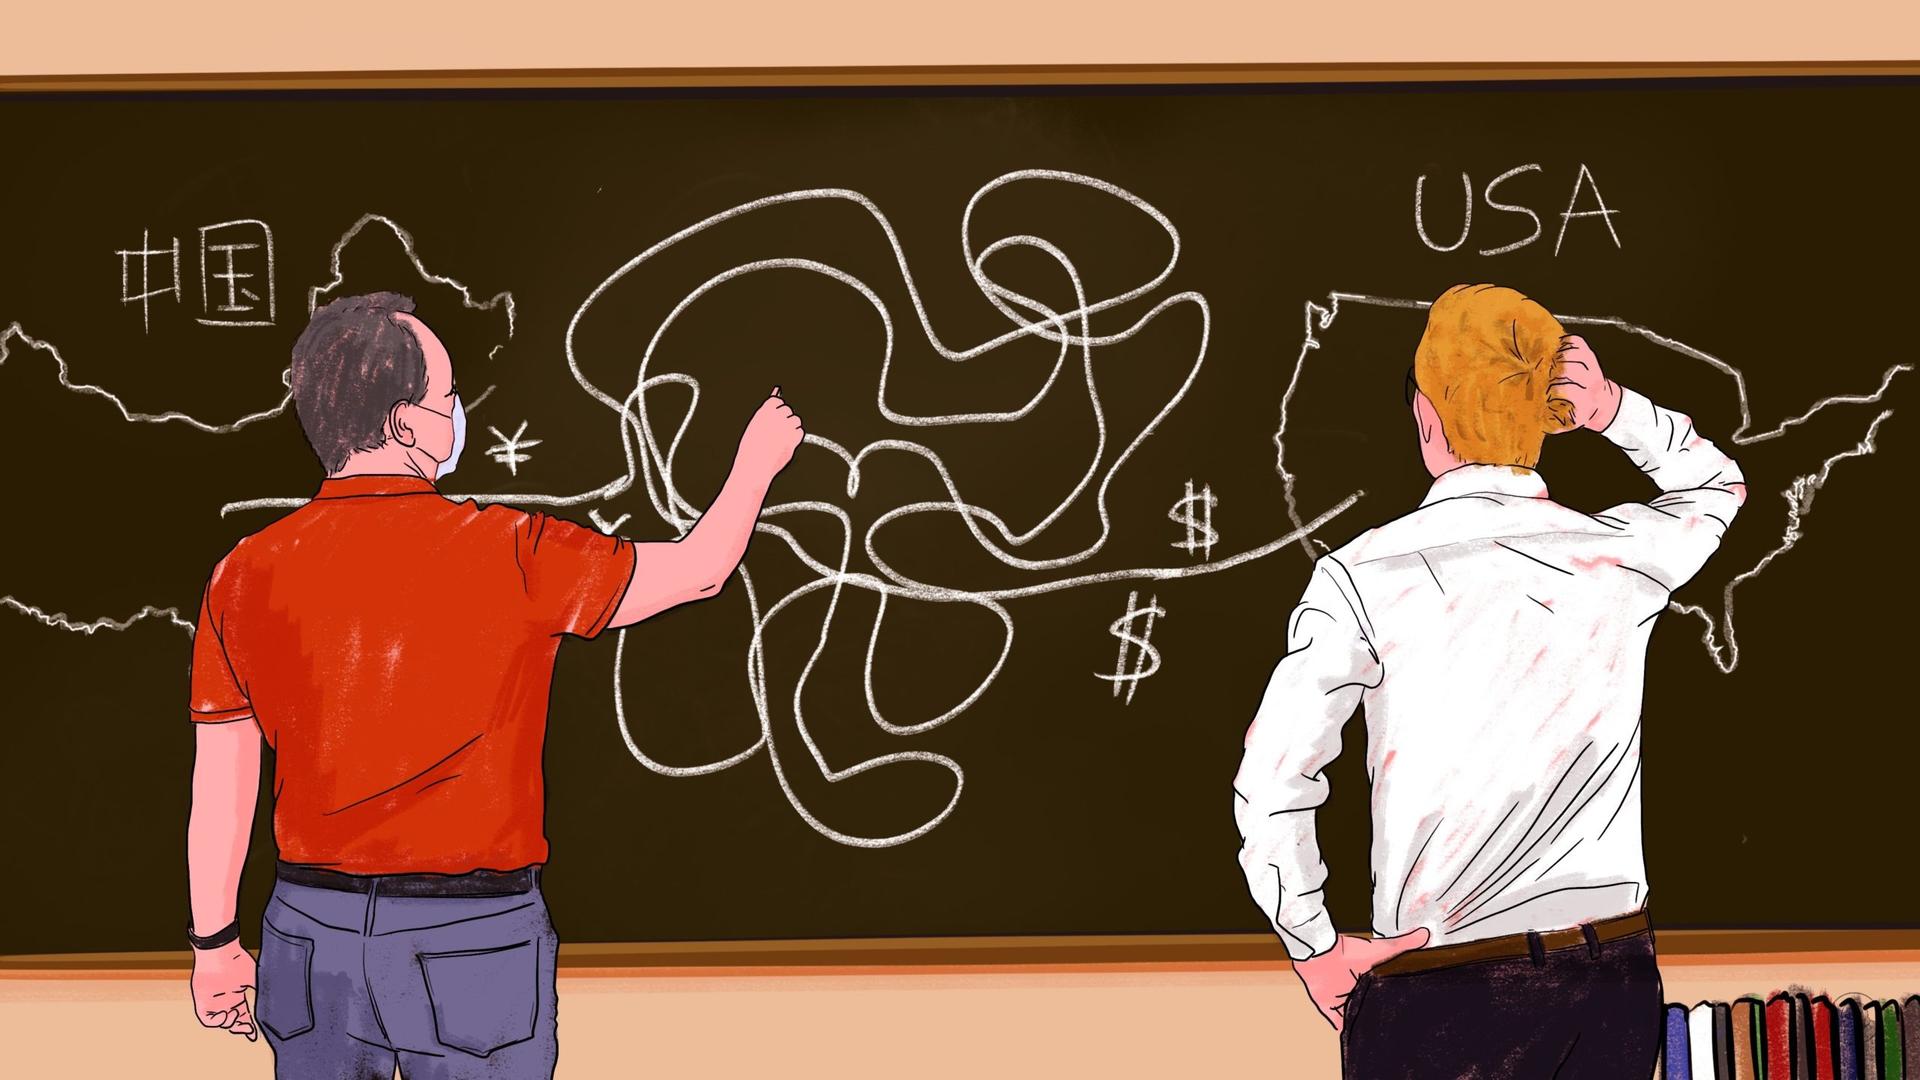 An illustration by Alex Santafe depicting two scholars discussing China - US investments